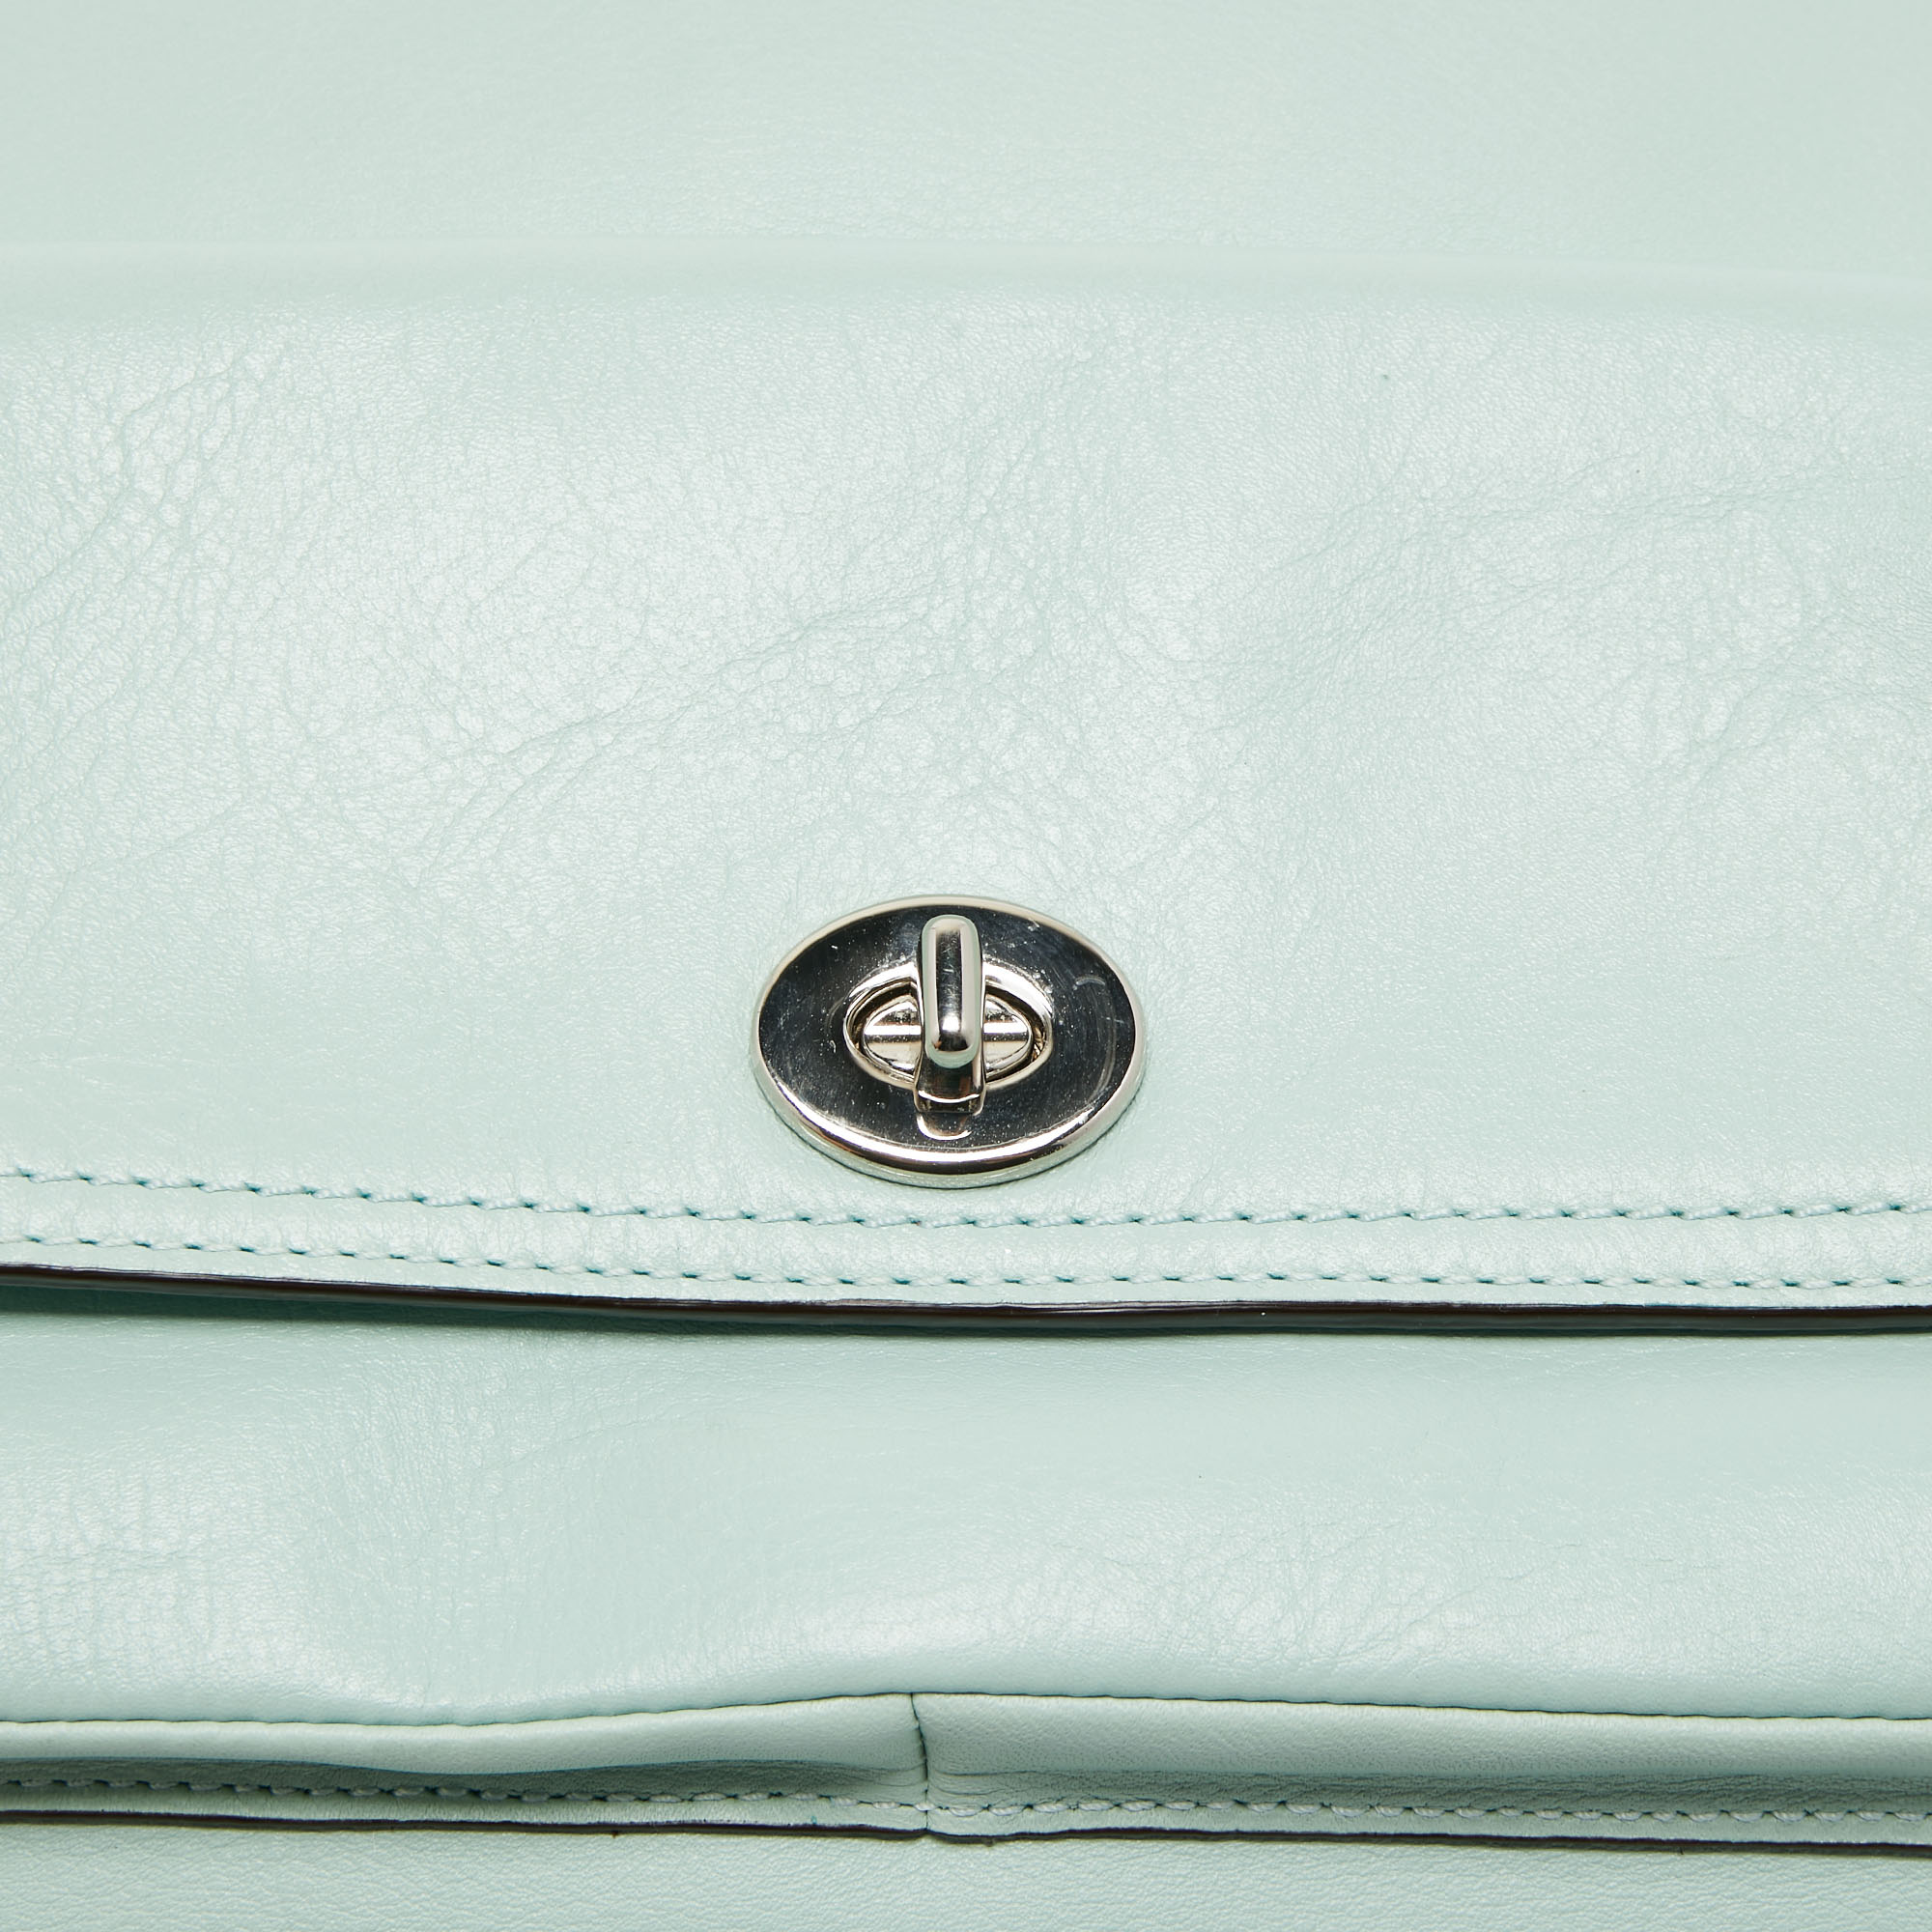 Coach Mint Green Leather Legacy Courtney Hobo